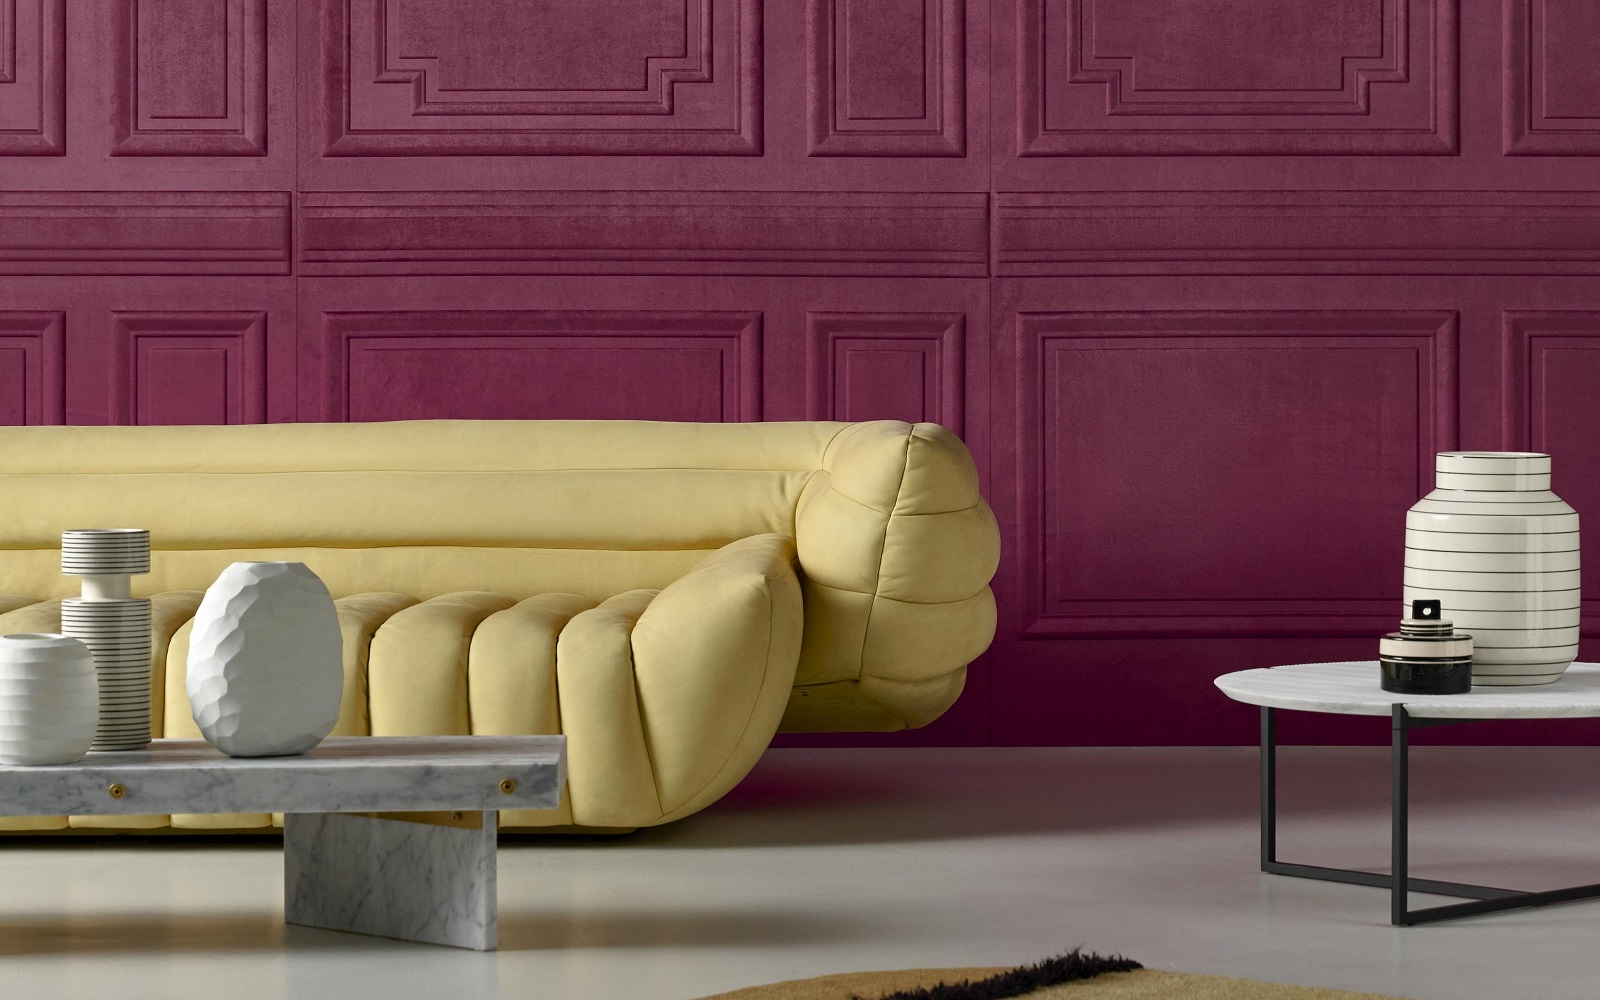 Objet wallcovering by Arte in purple contrasts with yellow sofa